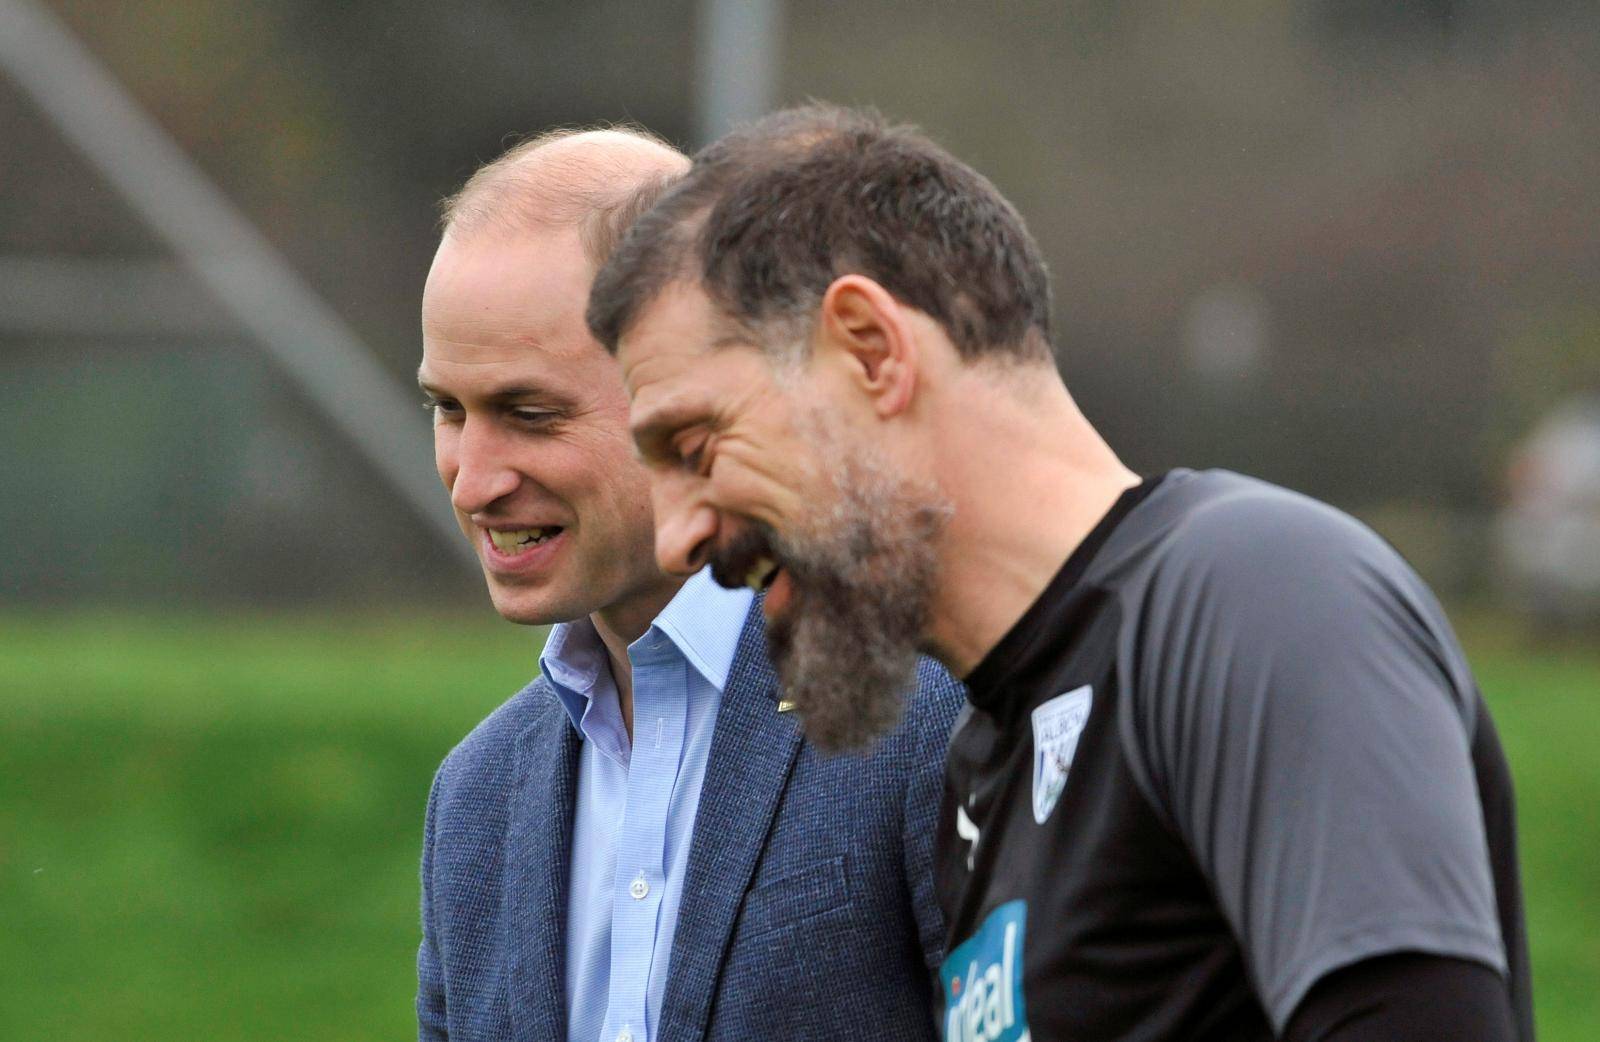 Britain's Prince William meets soccer players in Walsall